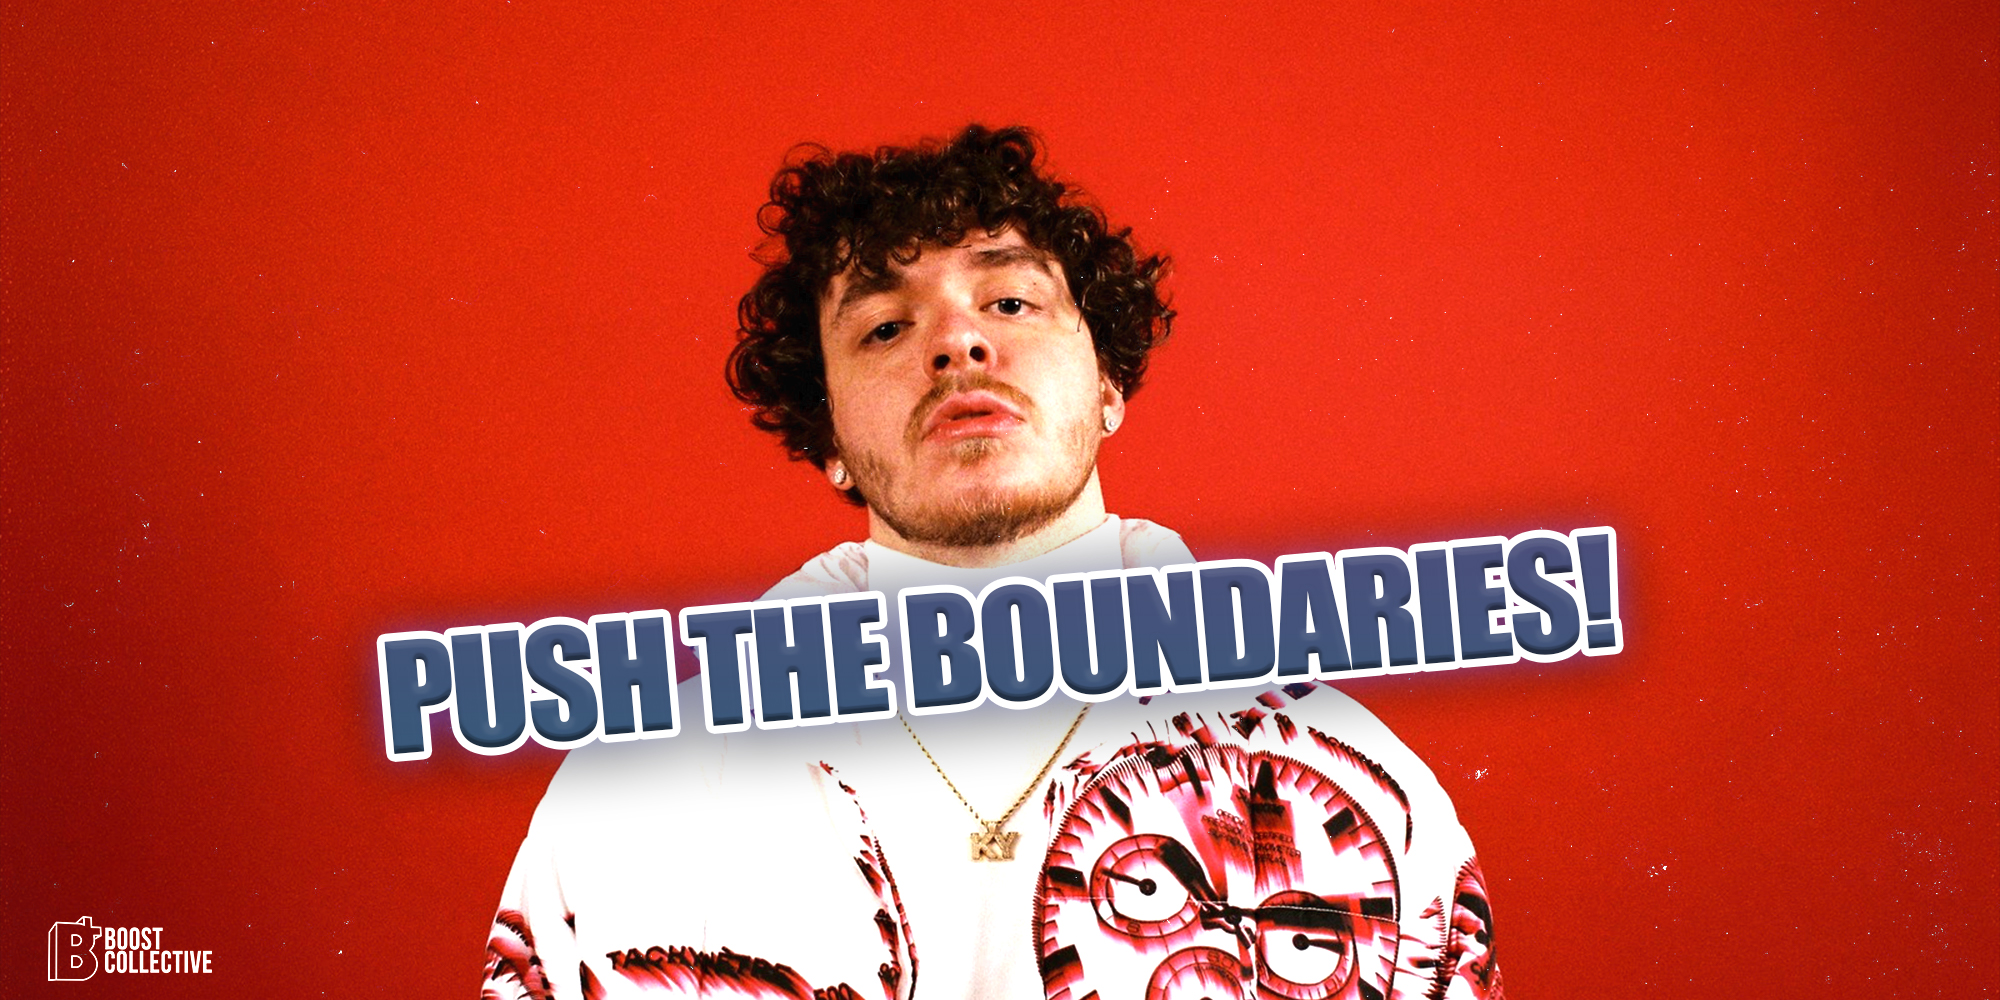 Push the boundaries in your songs